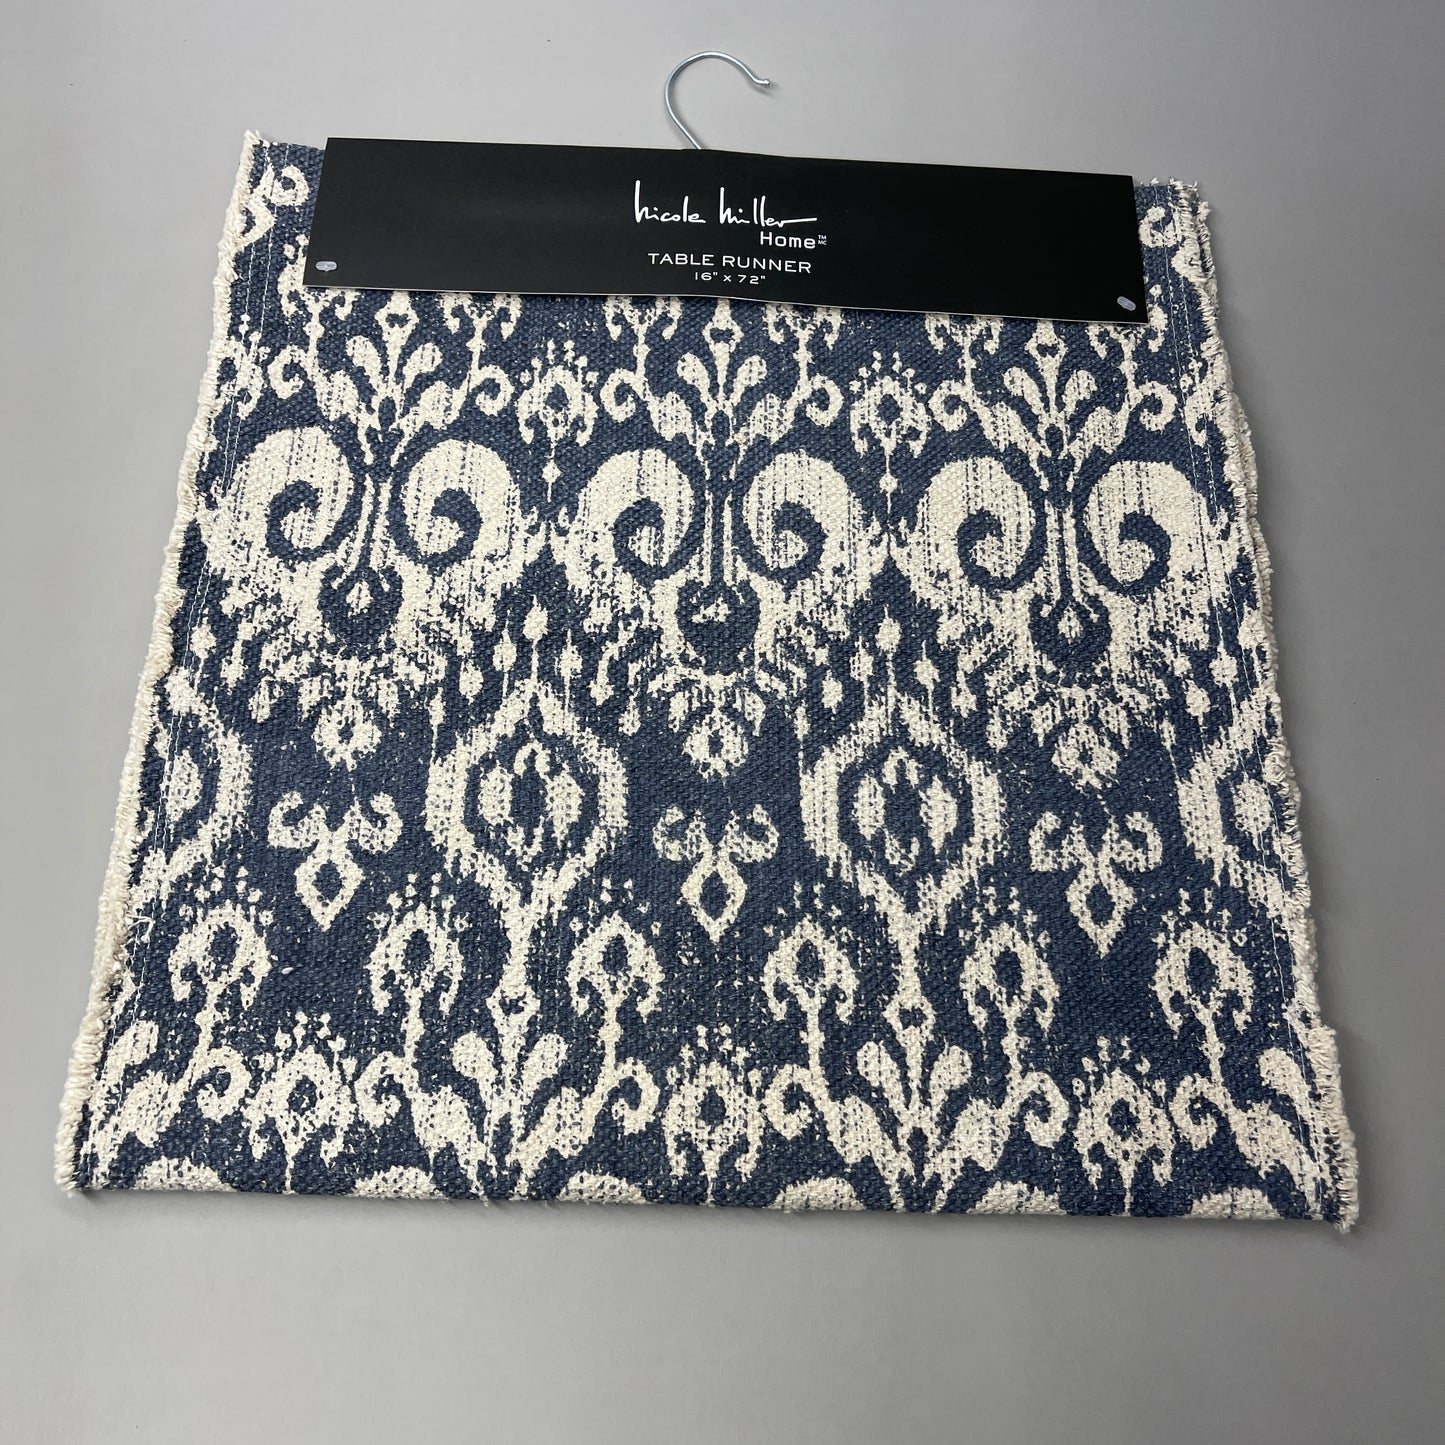 NICOLE MILLER HOME Table Runner 16" x 72" Blue 100% Cotton 502529 (New)